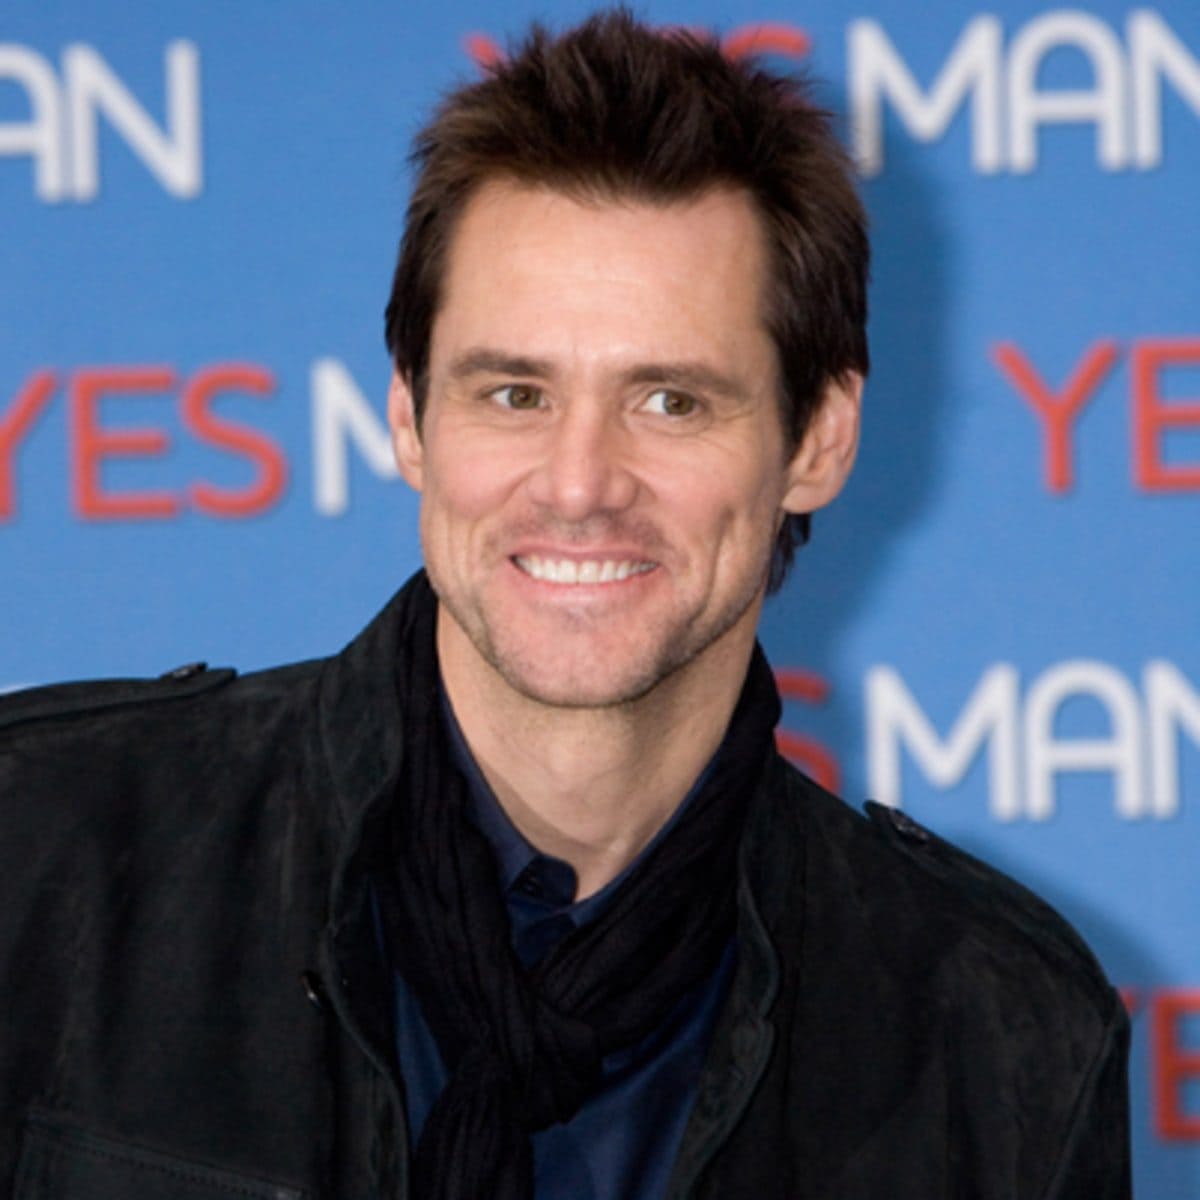 Jim Carrey (Actor) Wiki, Age, Wife, Education, Net Worth & More 3